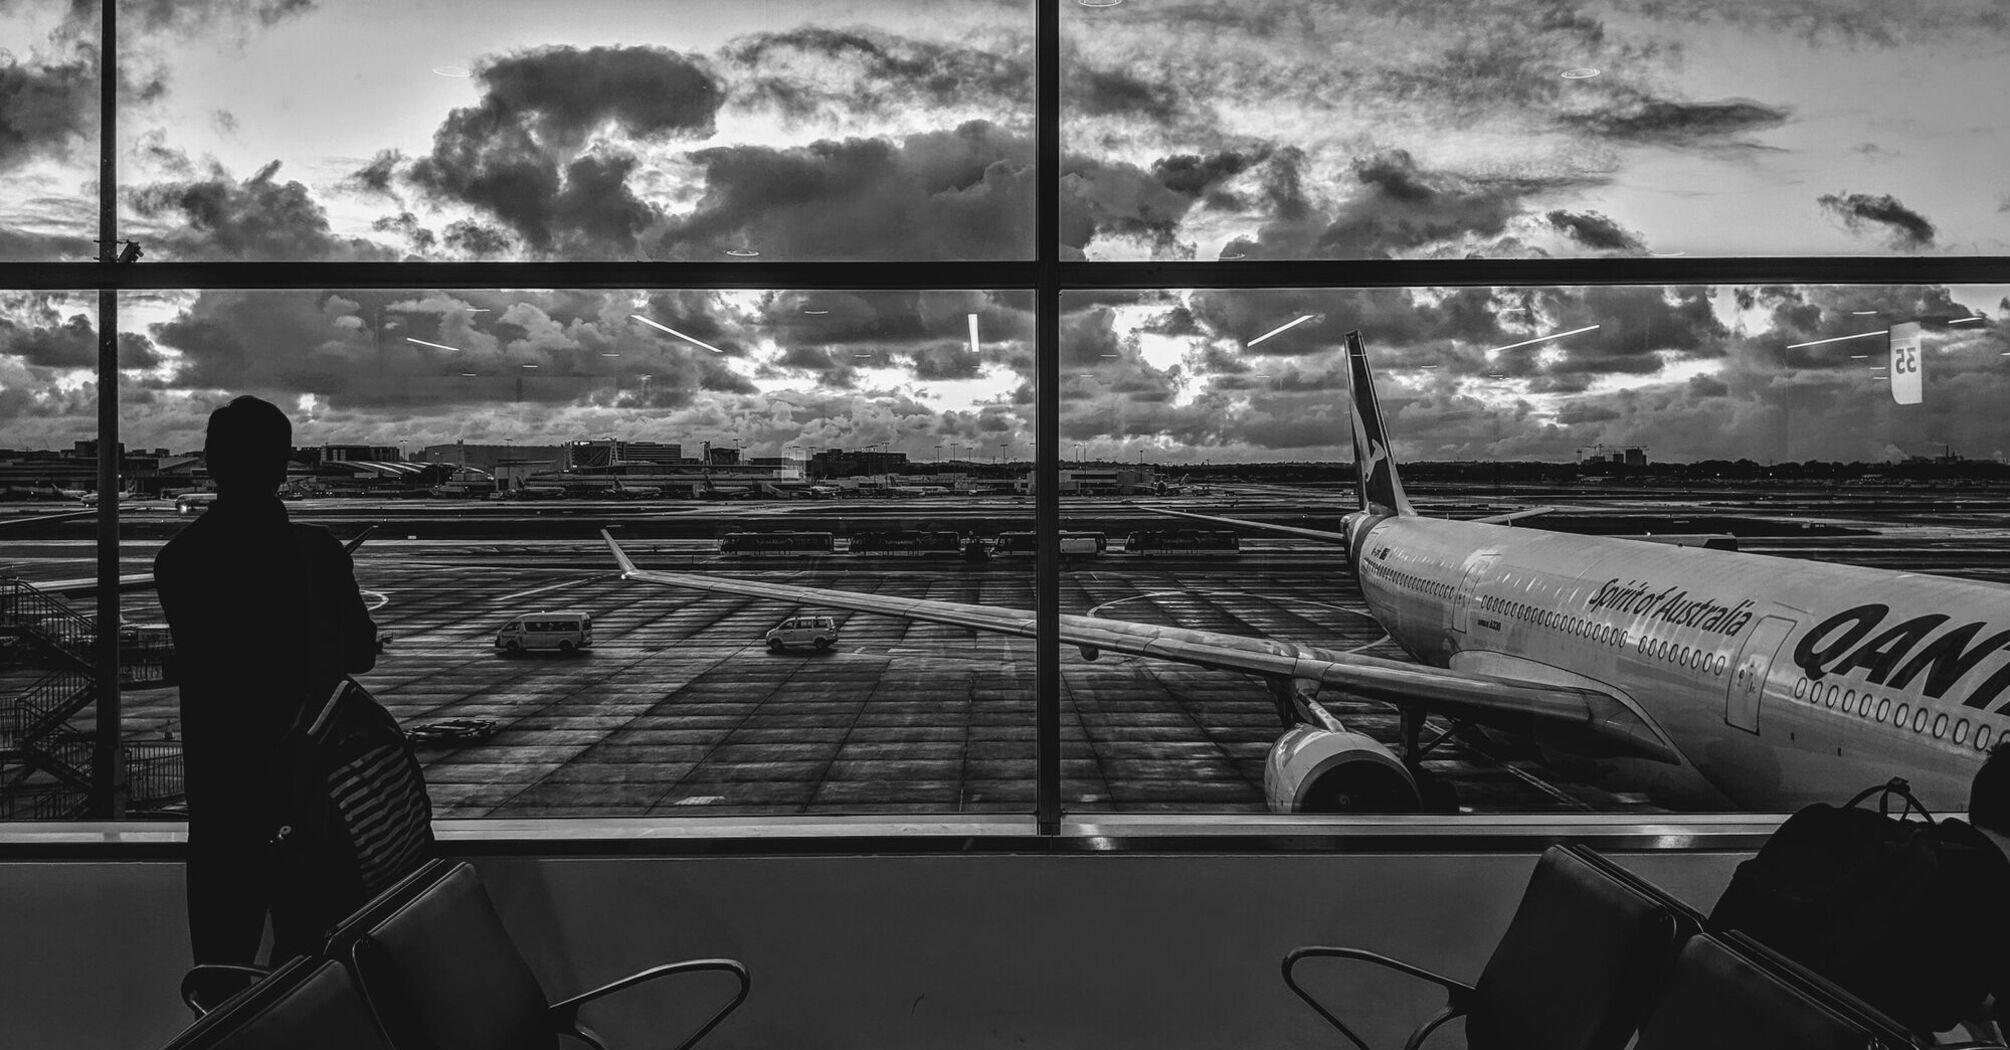 Grayscale photography of man standing in front of plane